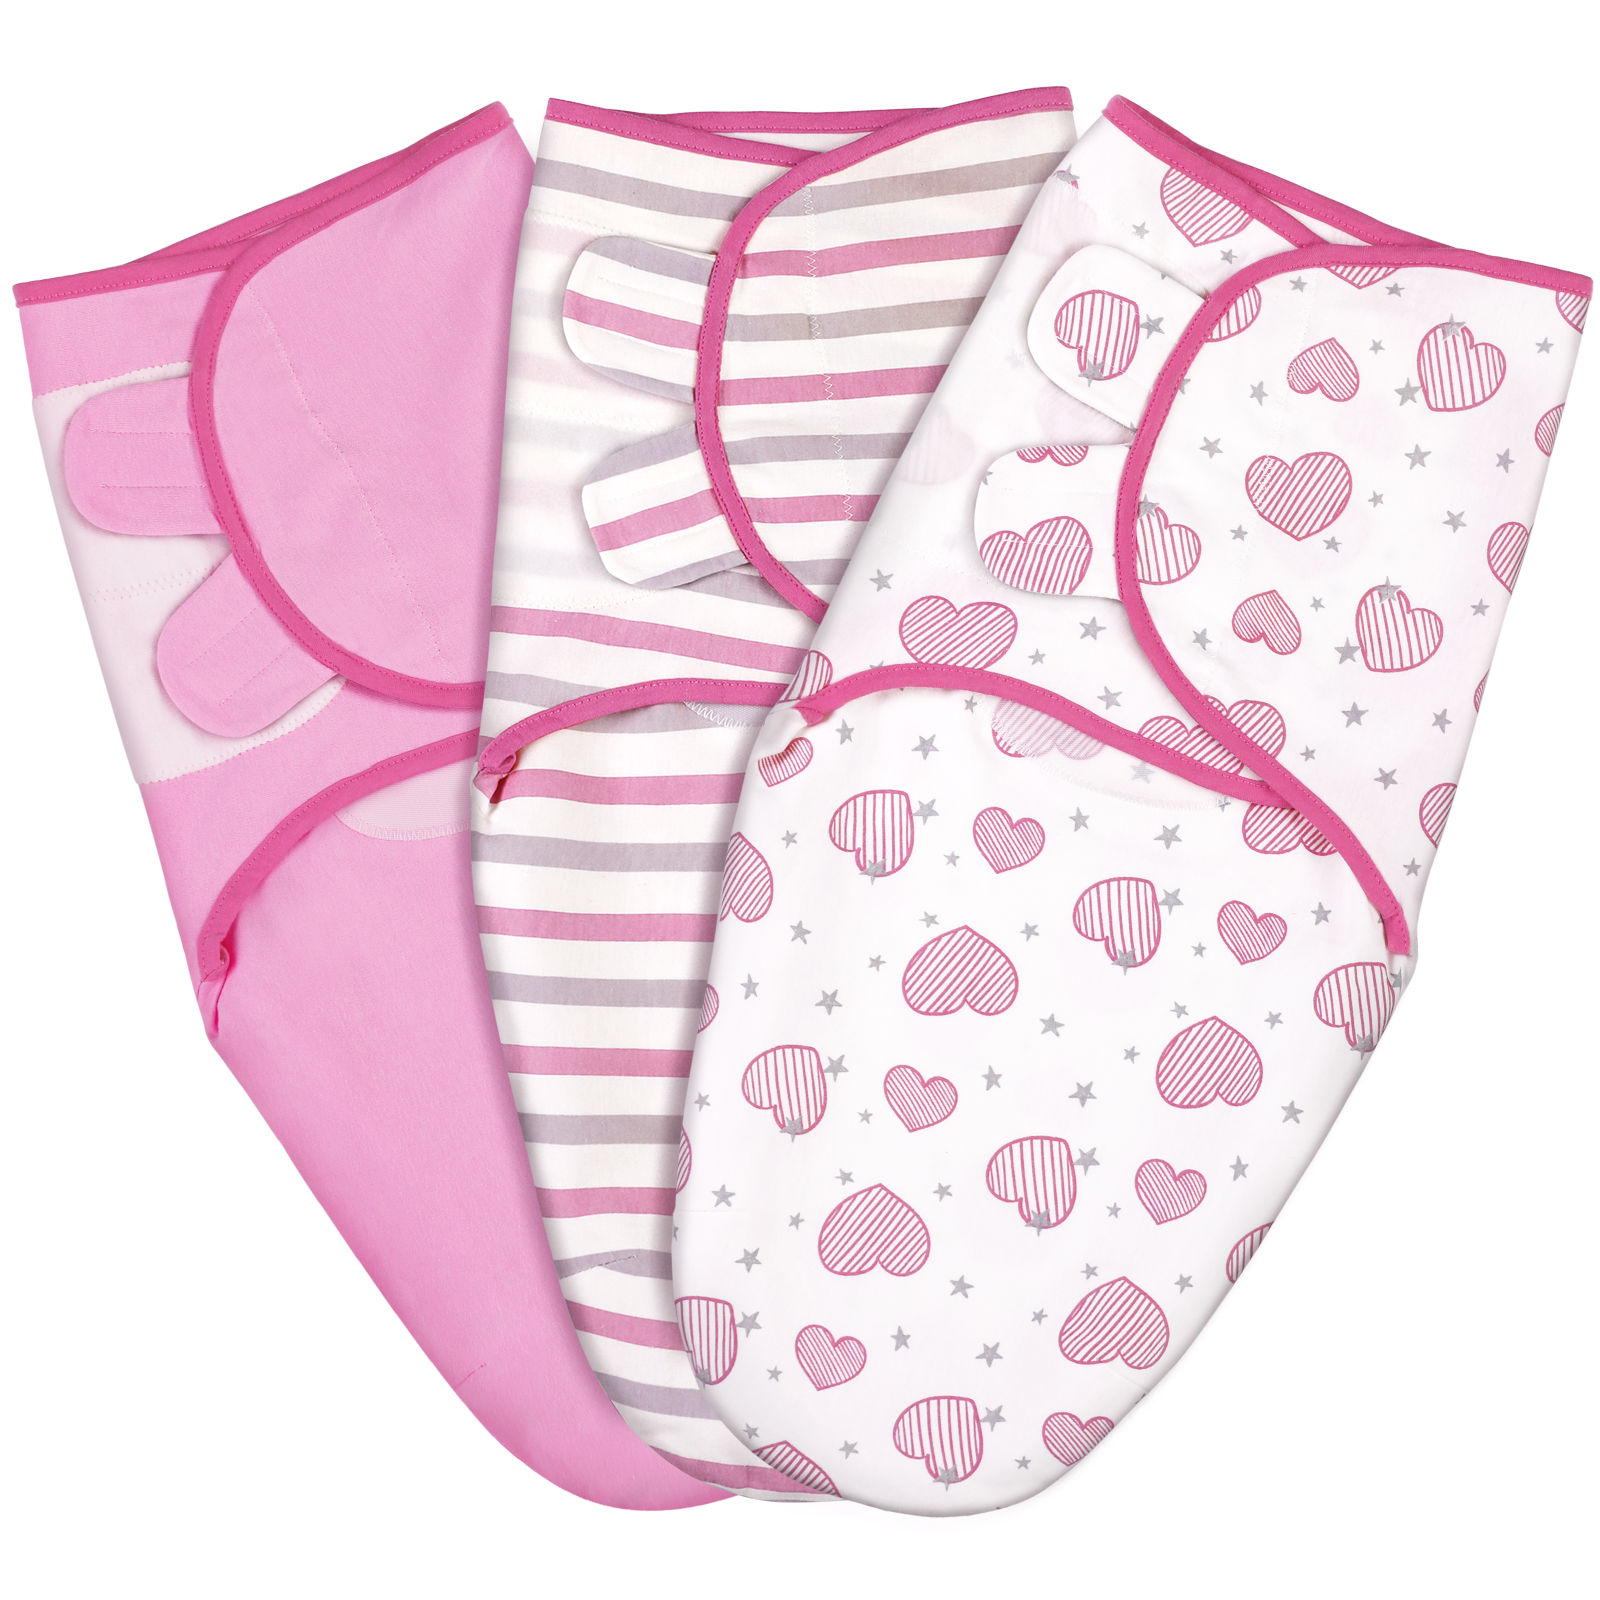 Pink Heart | Gllquen Baby Swaddle 0-3 Months 3 Pack